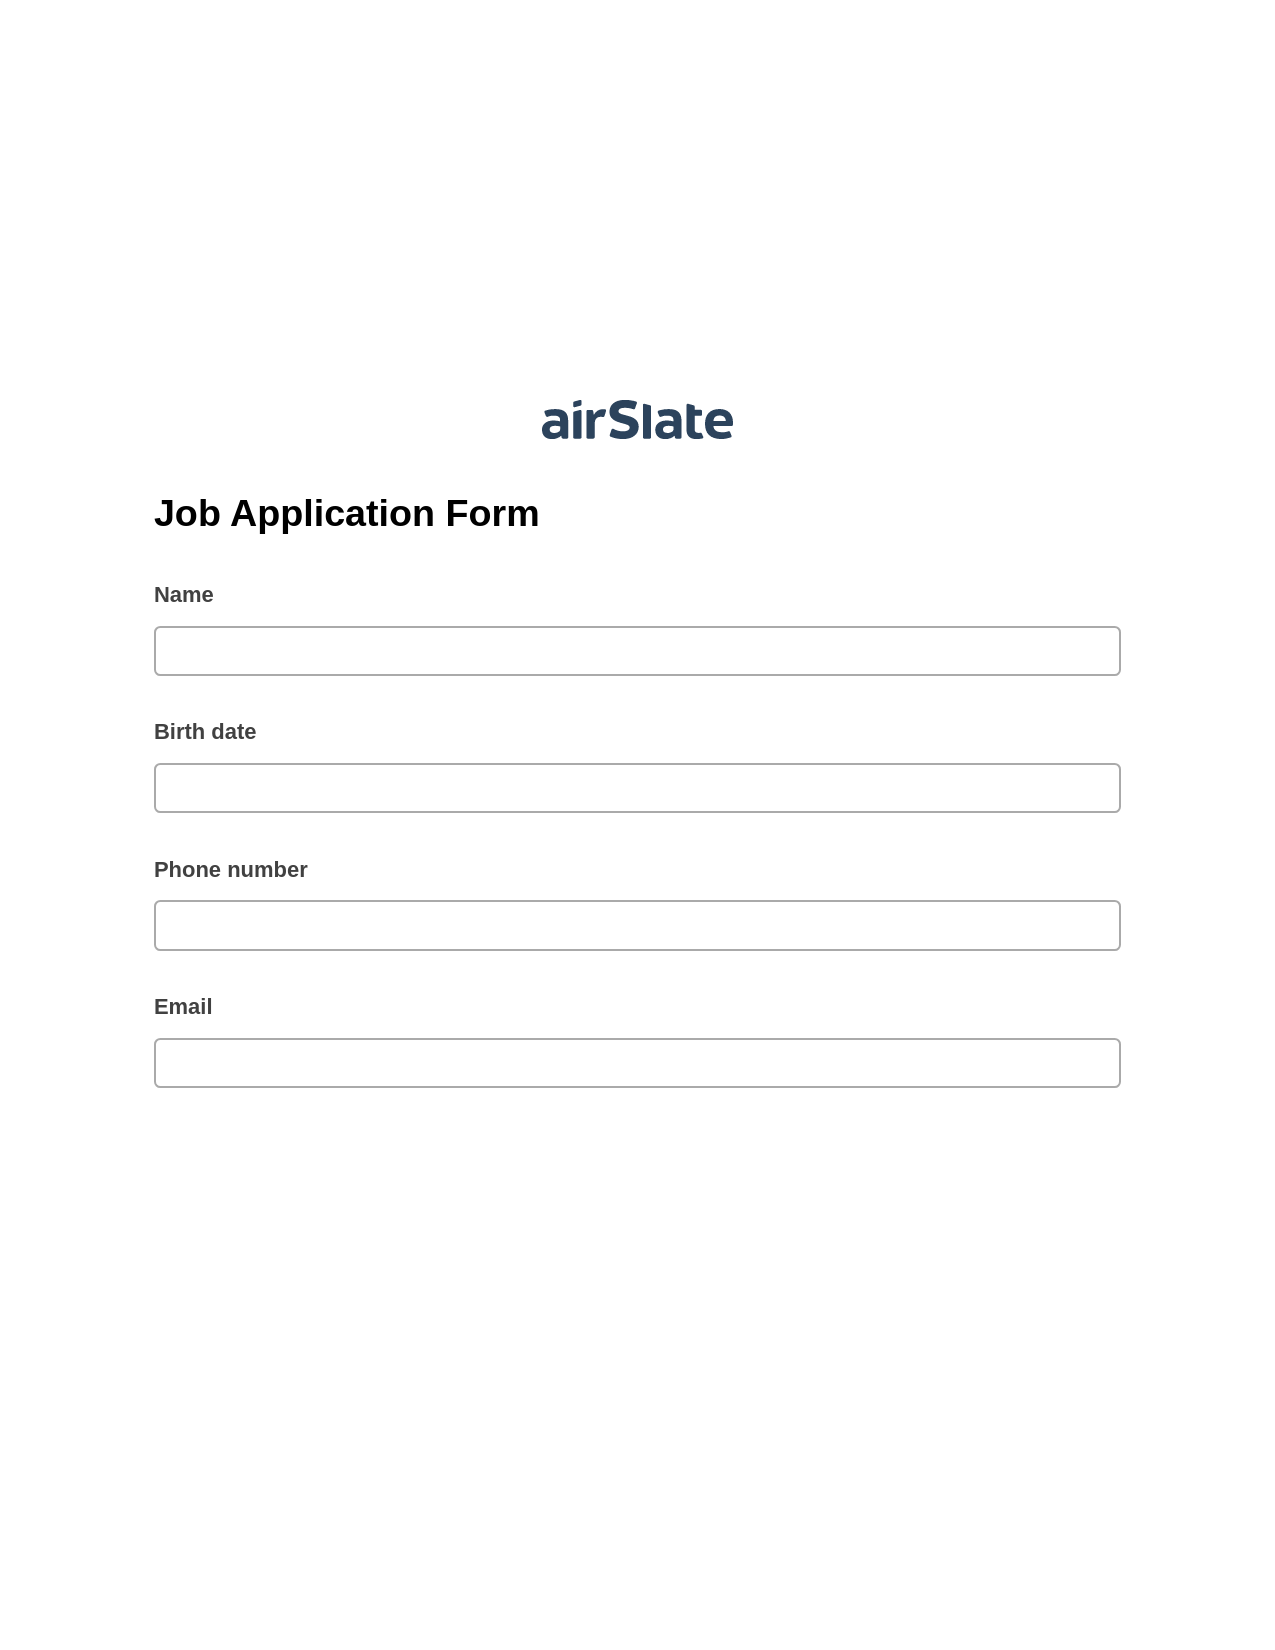 Multirole Job Application Form Pre-fill Dropdown from Airtable, Create slate addon, Archive to SharePoint Folder Bot